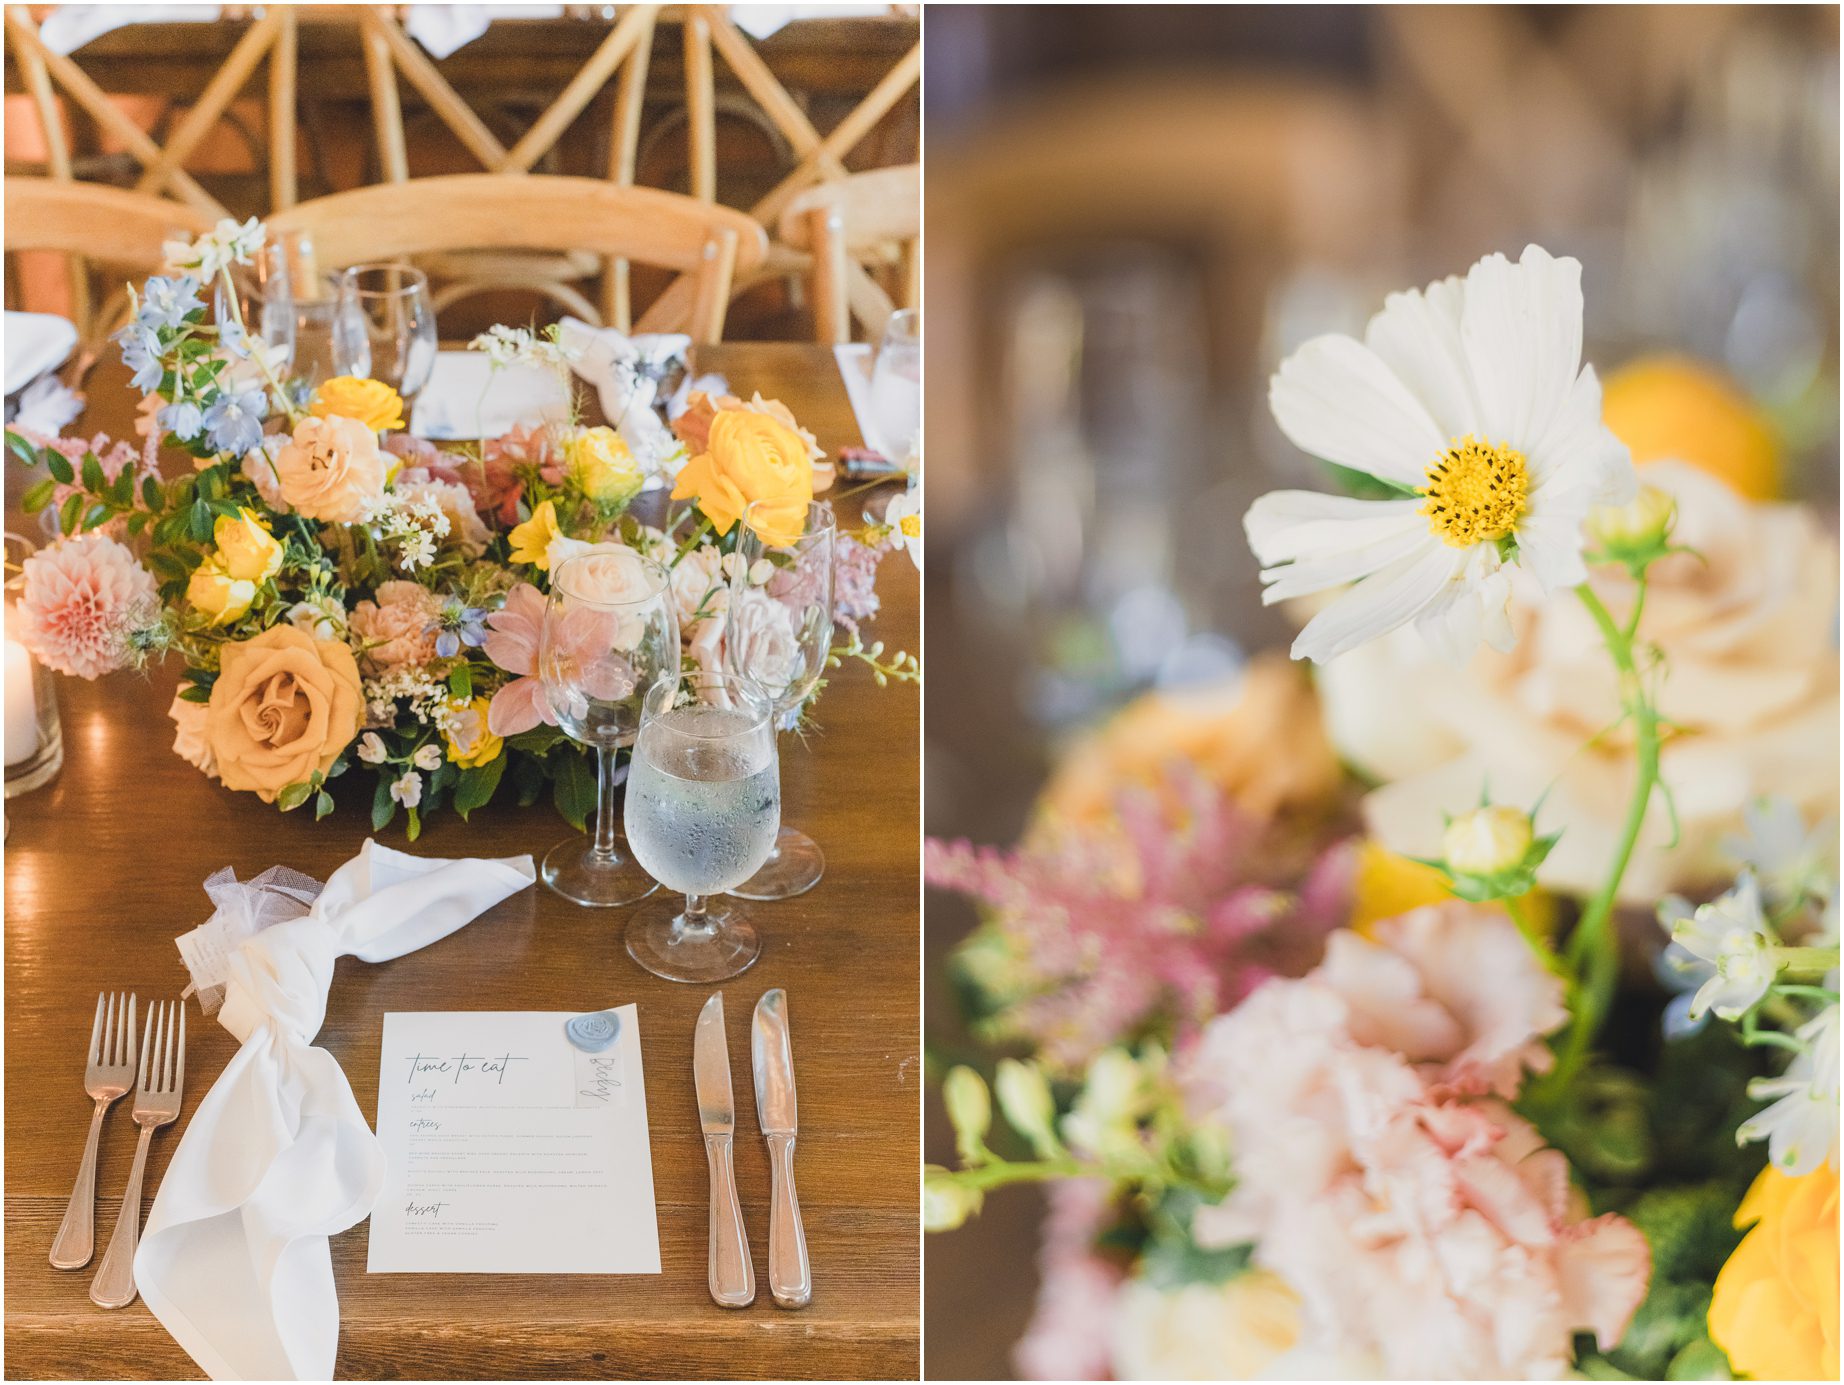 Colorful florals on a wooden table, set for a wedding in Malibu